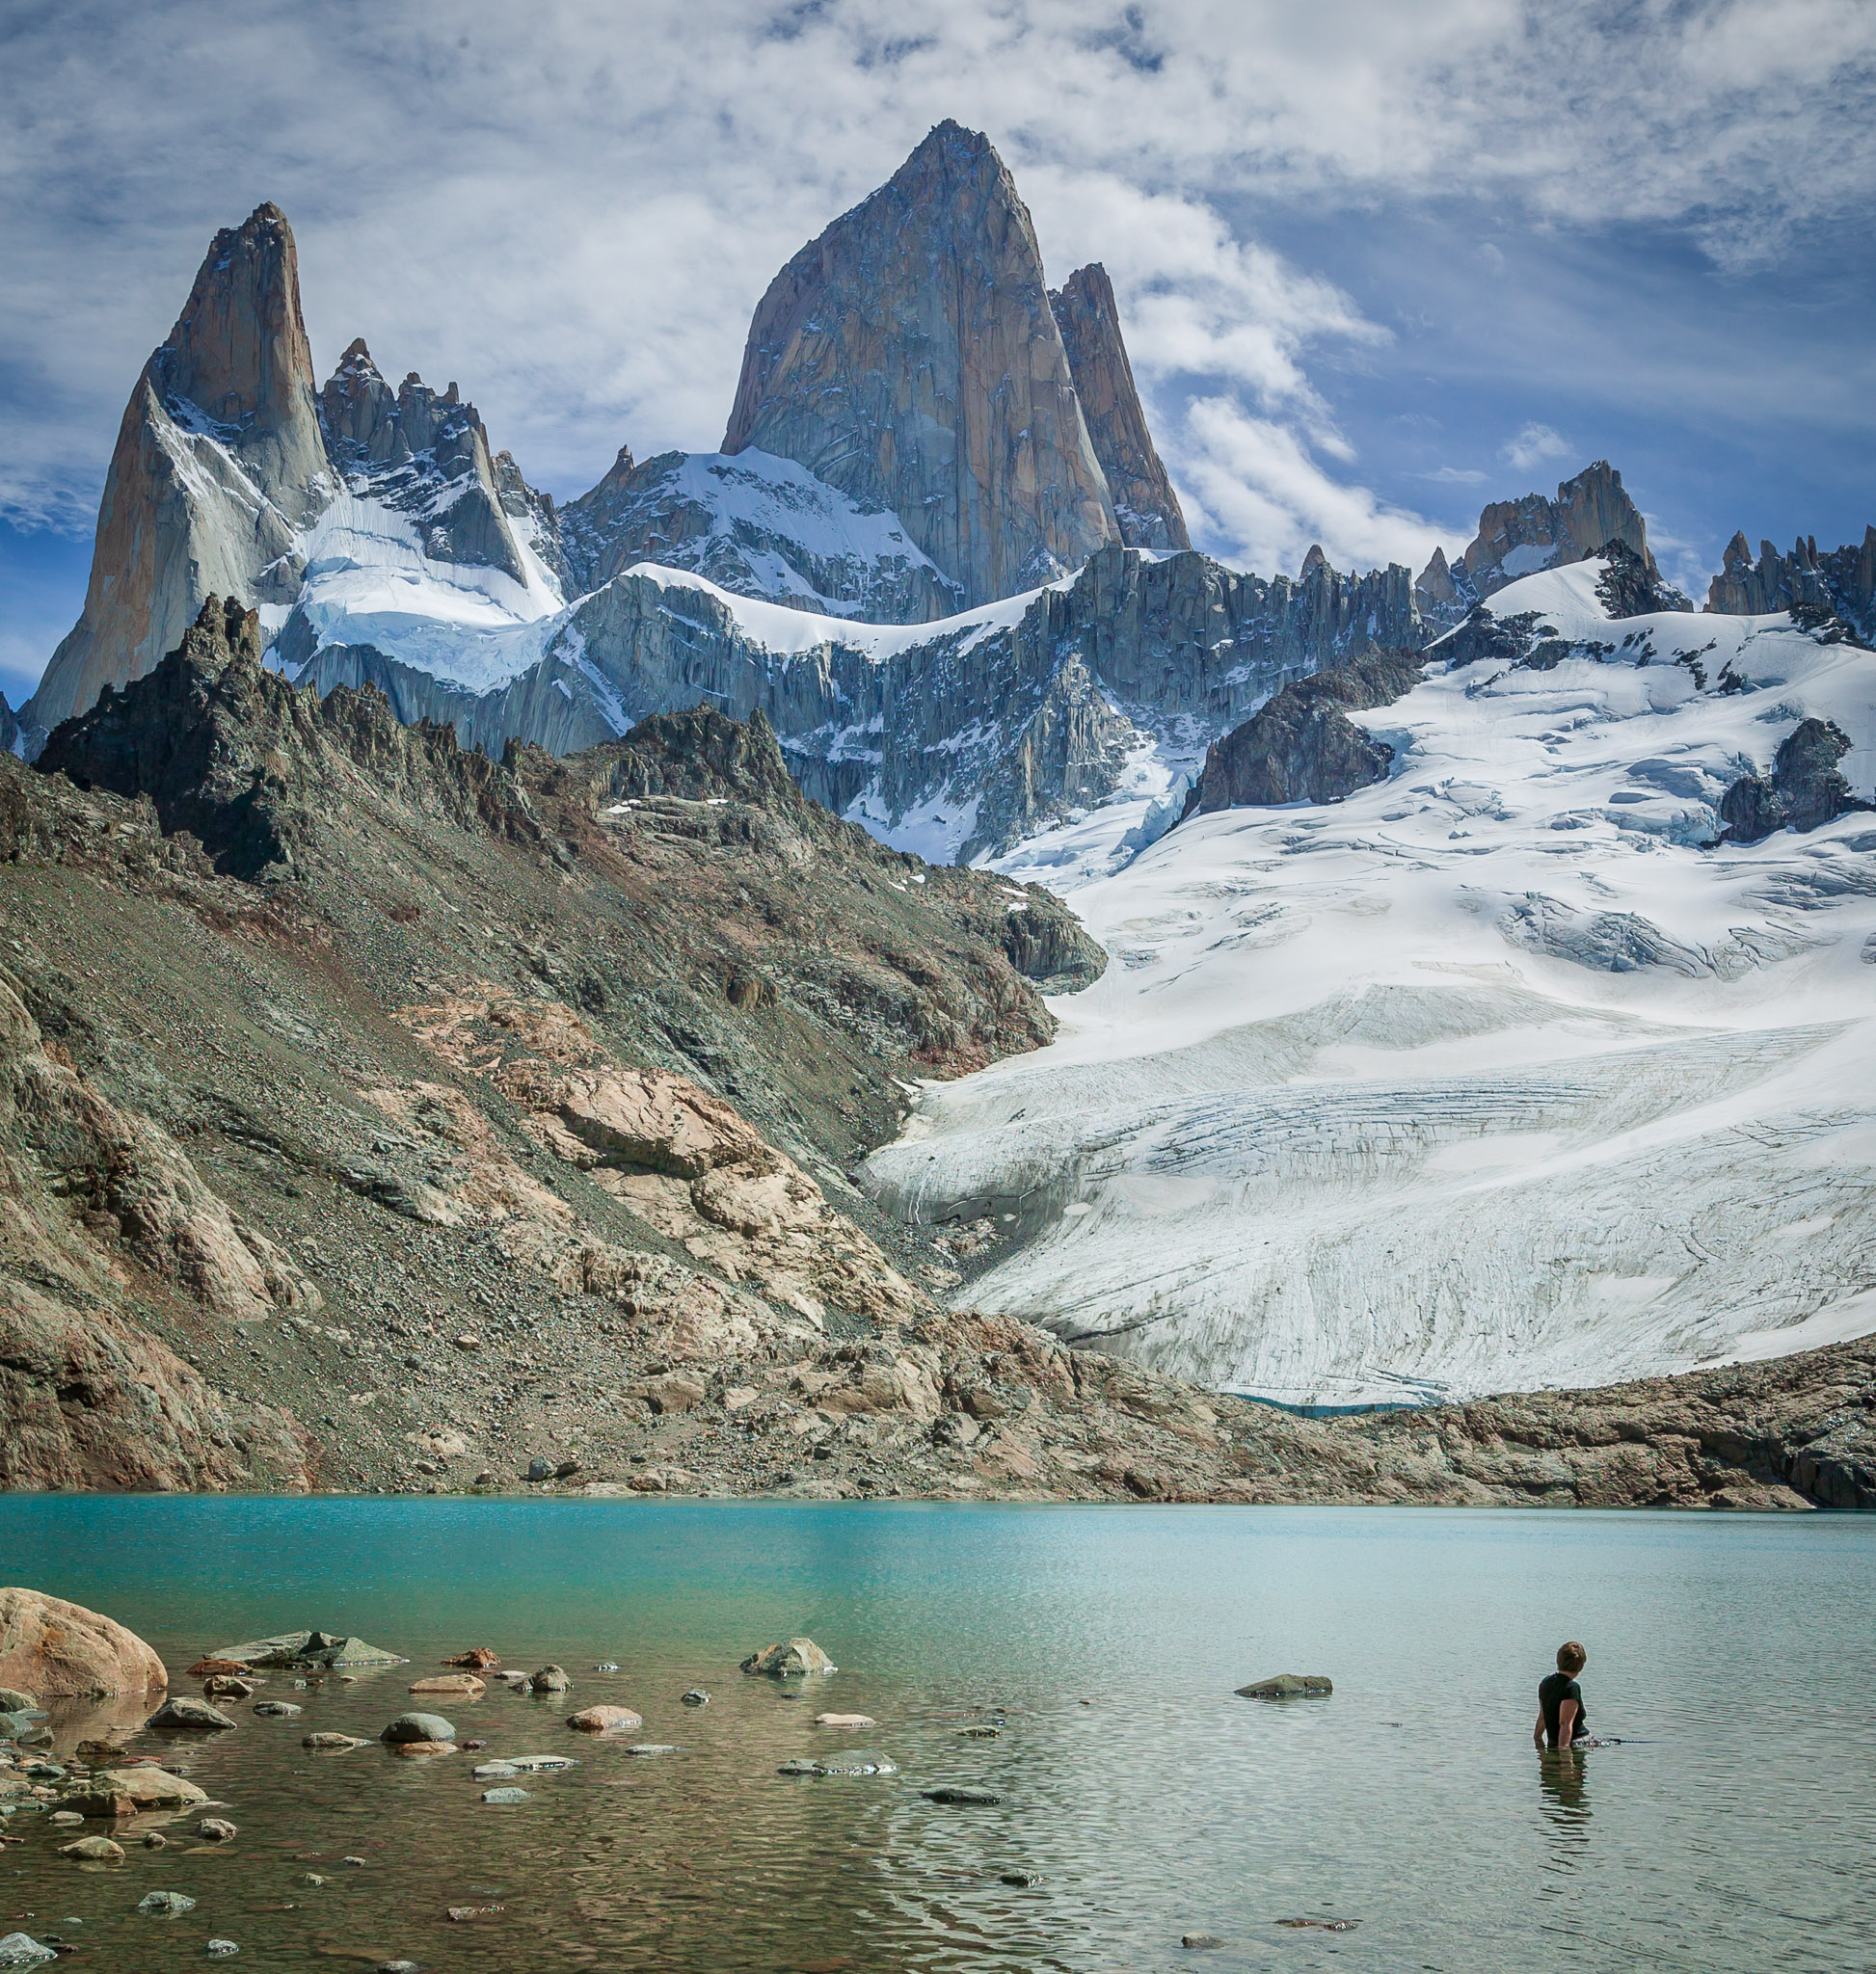 Cooling off in Laguna de los Tres on an 80+°F day